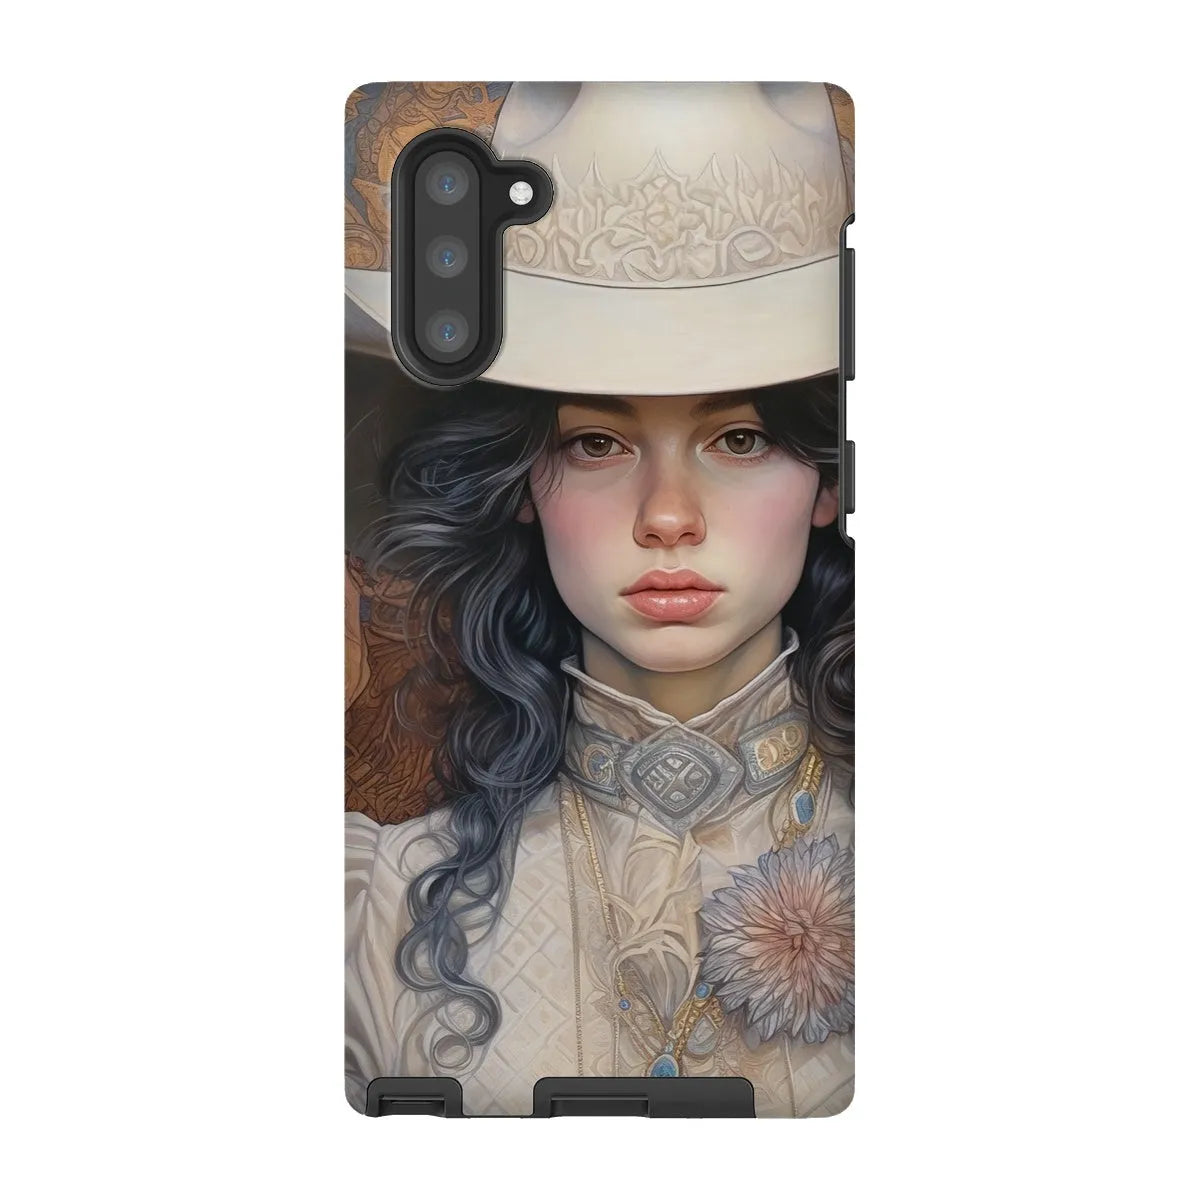 Helena The Lesbian Cowgirl - Sapphic Art Phone Case - Samsung Galaxy Note 10 / Matte - Mobile Phone Cases - Aesthetic